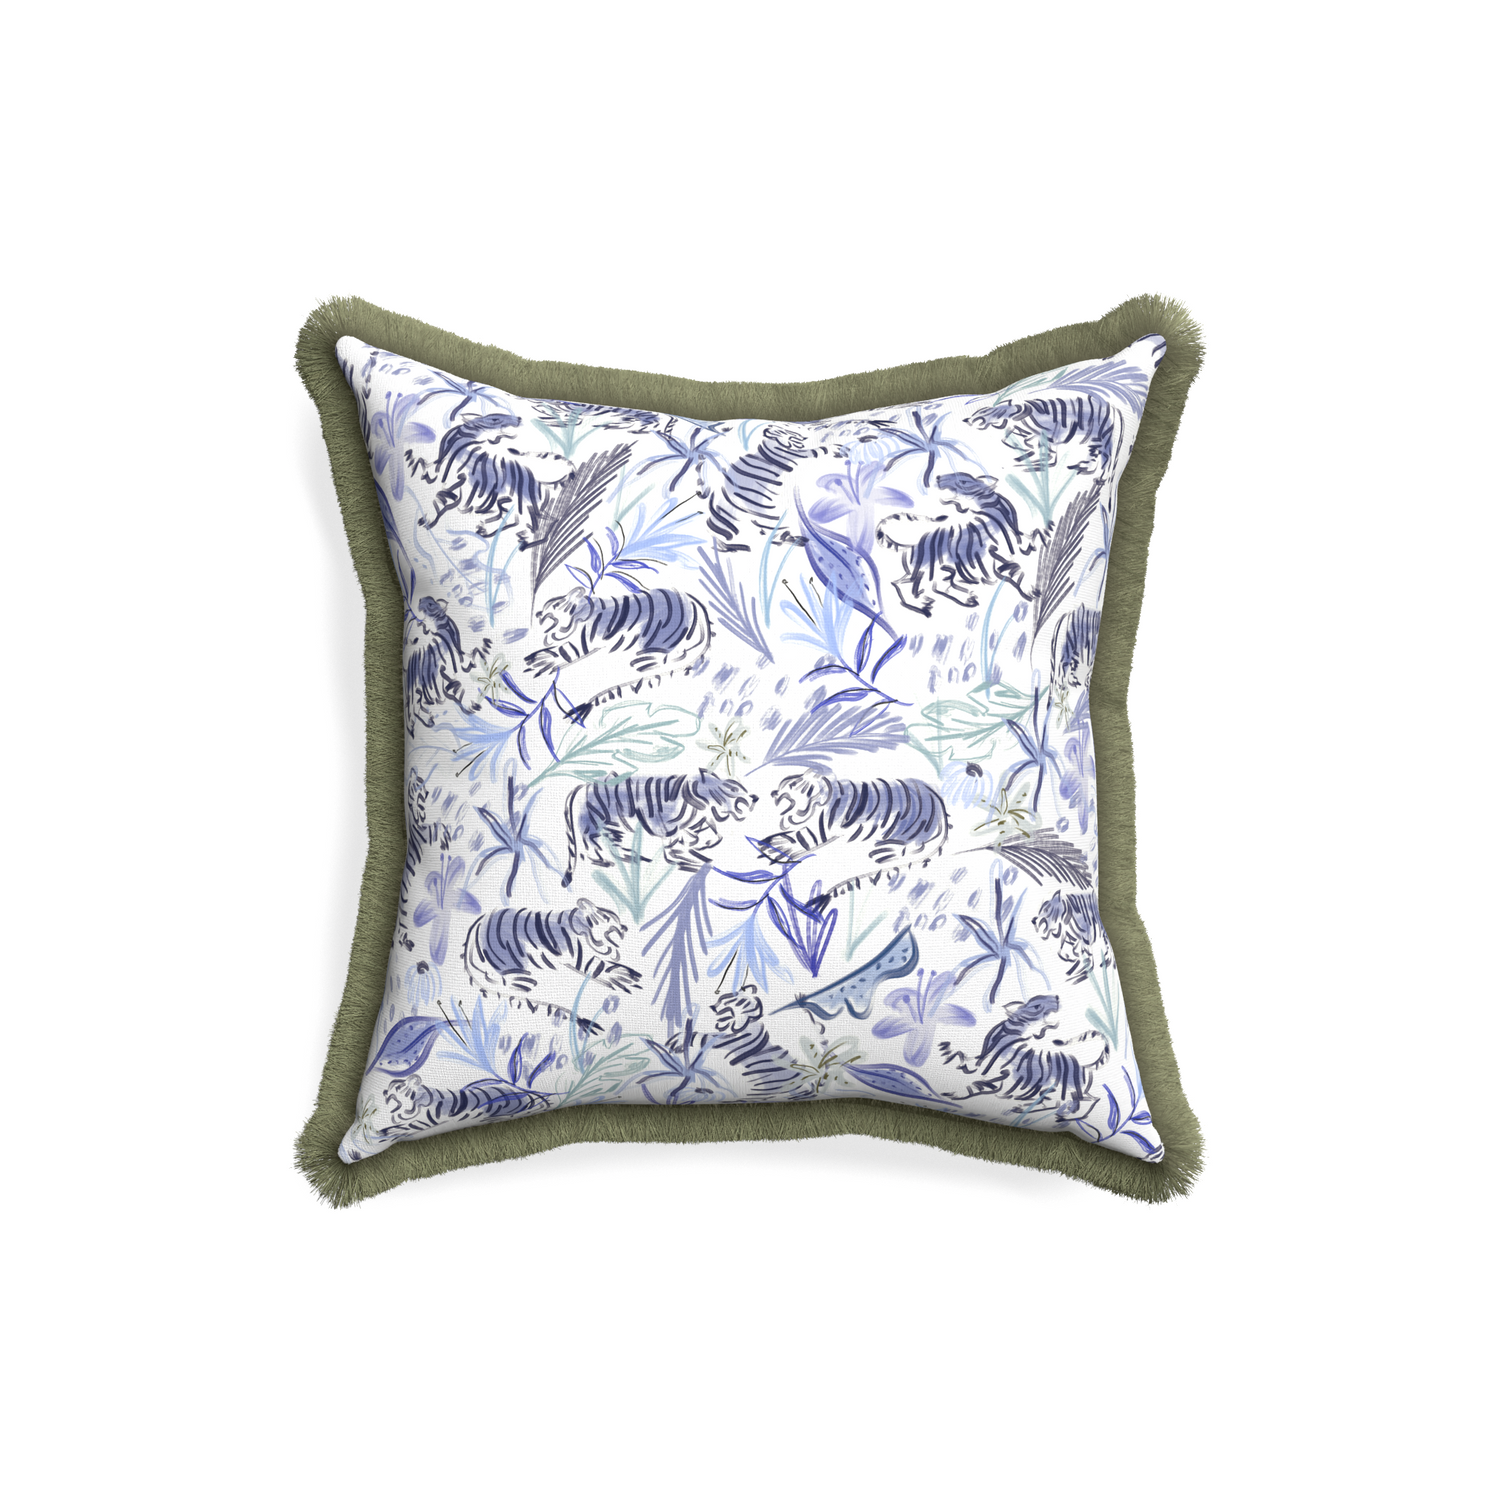 18-square frida blue custom blue with intricate tiger designpillow with sage fringe on white background